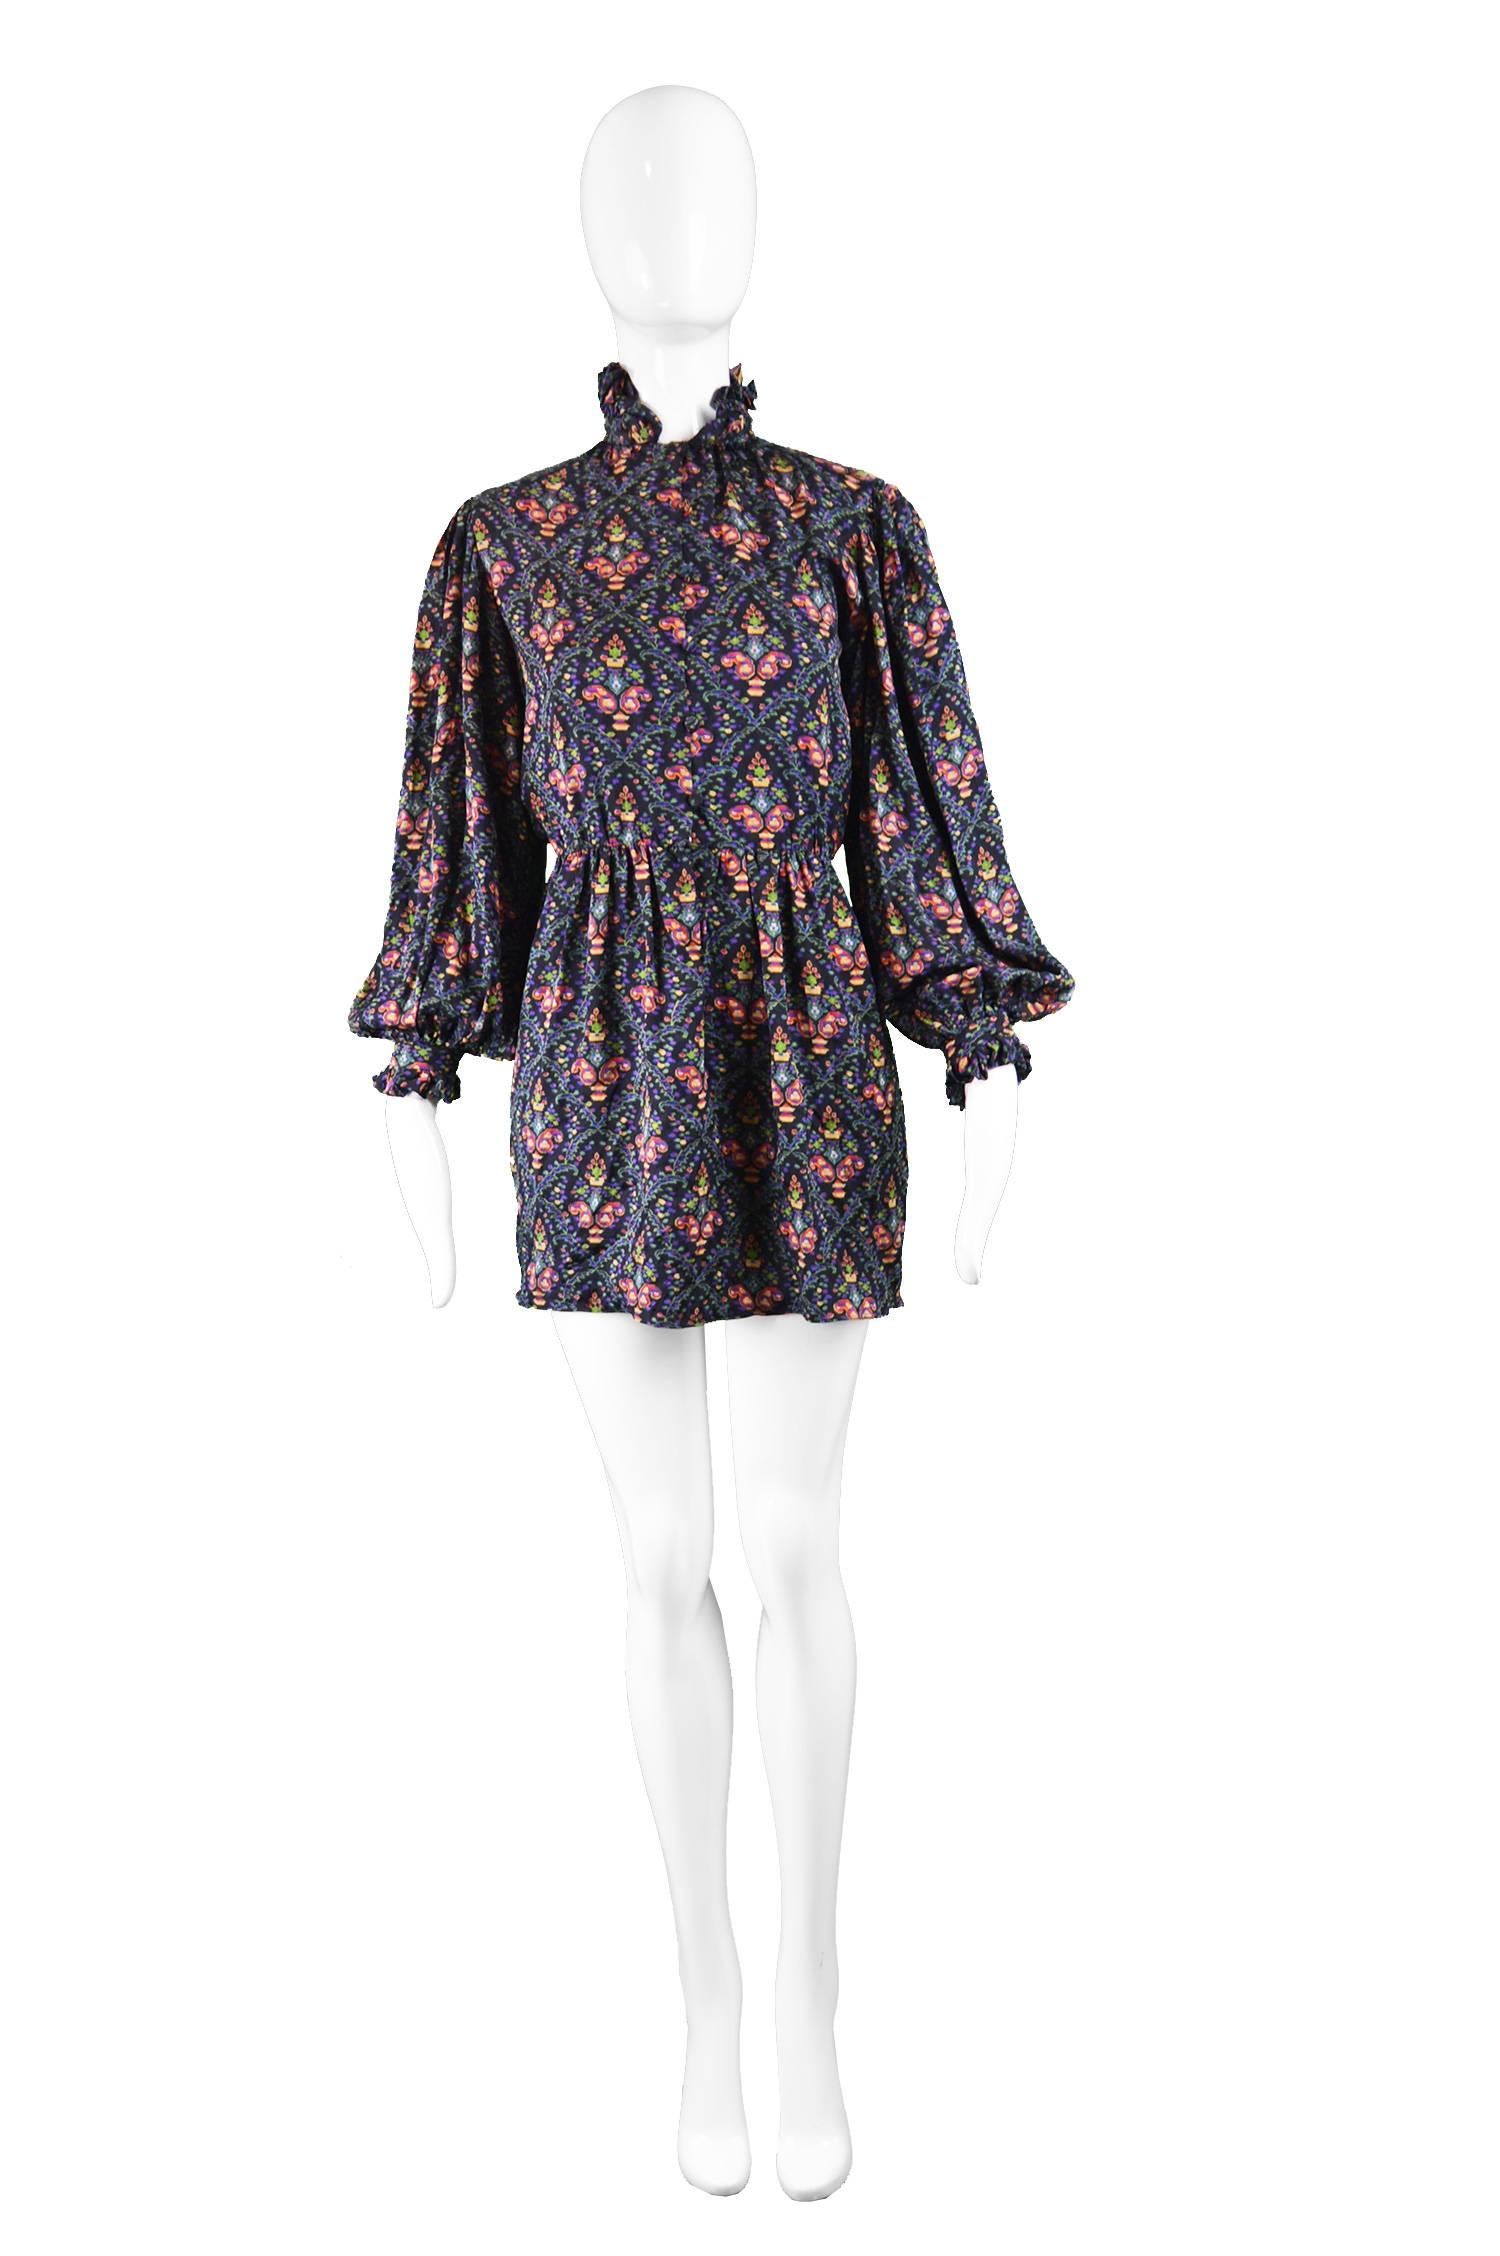 A beautiful vintage women's mini dress from the 70s by American luxury designer, Oscar de la Renta. In a light and airy black silk with a bohemian floral tapestry style print throughout. The silk really gives fluidity and drape to the dramatic